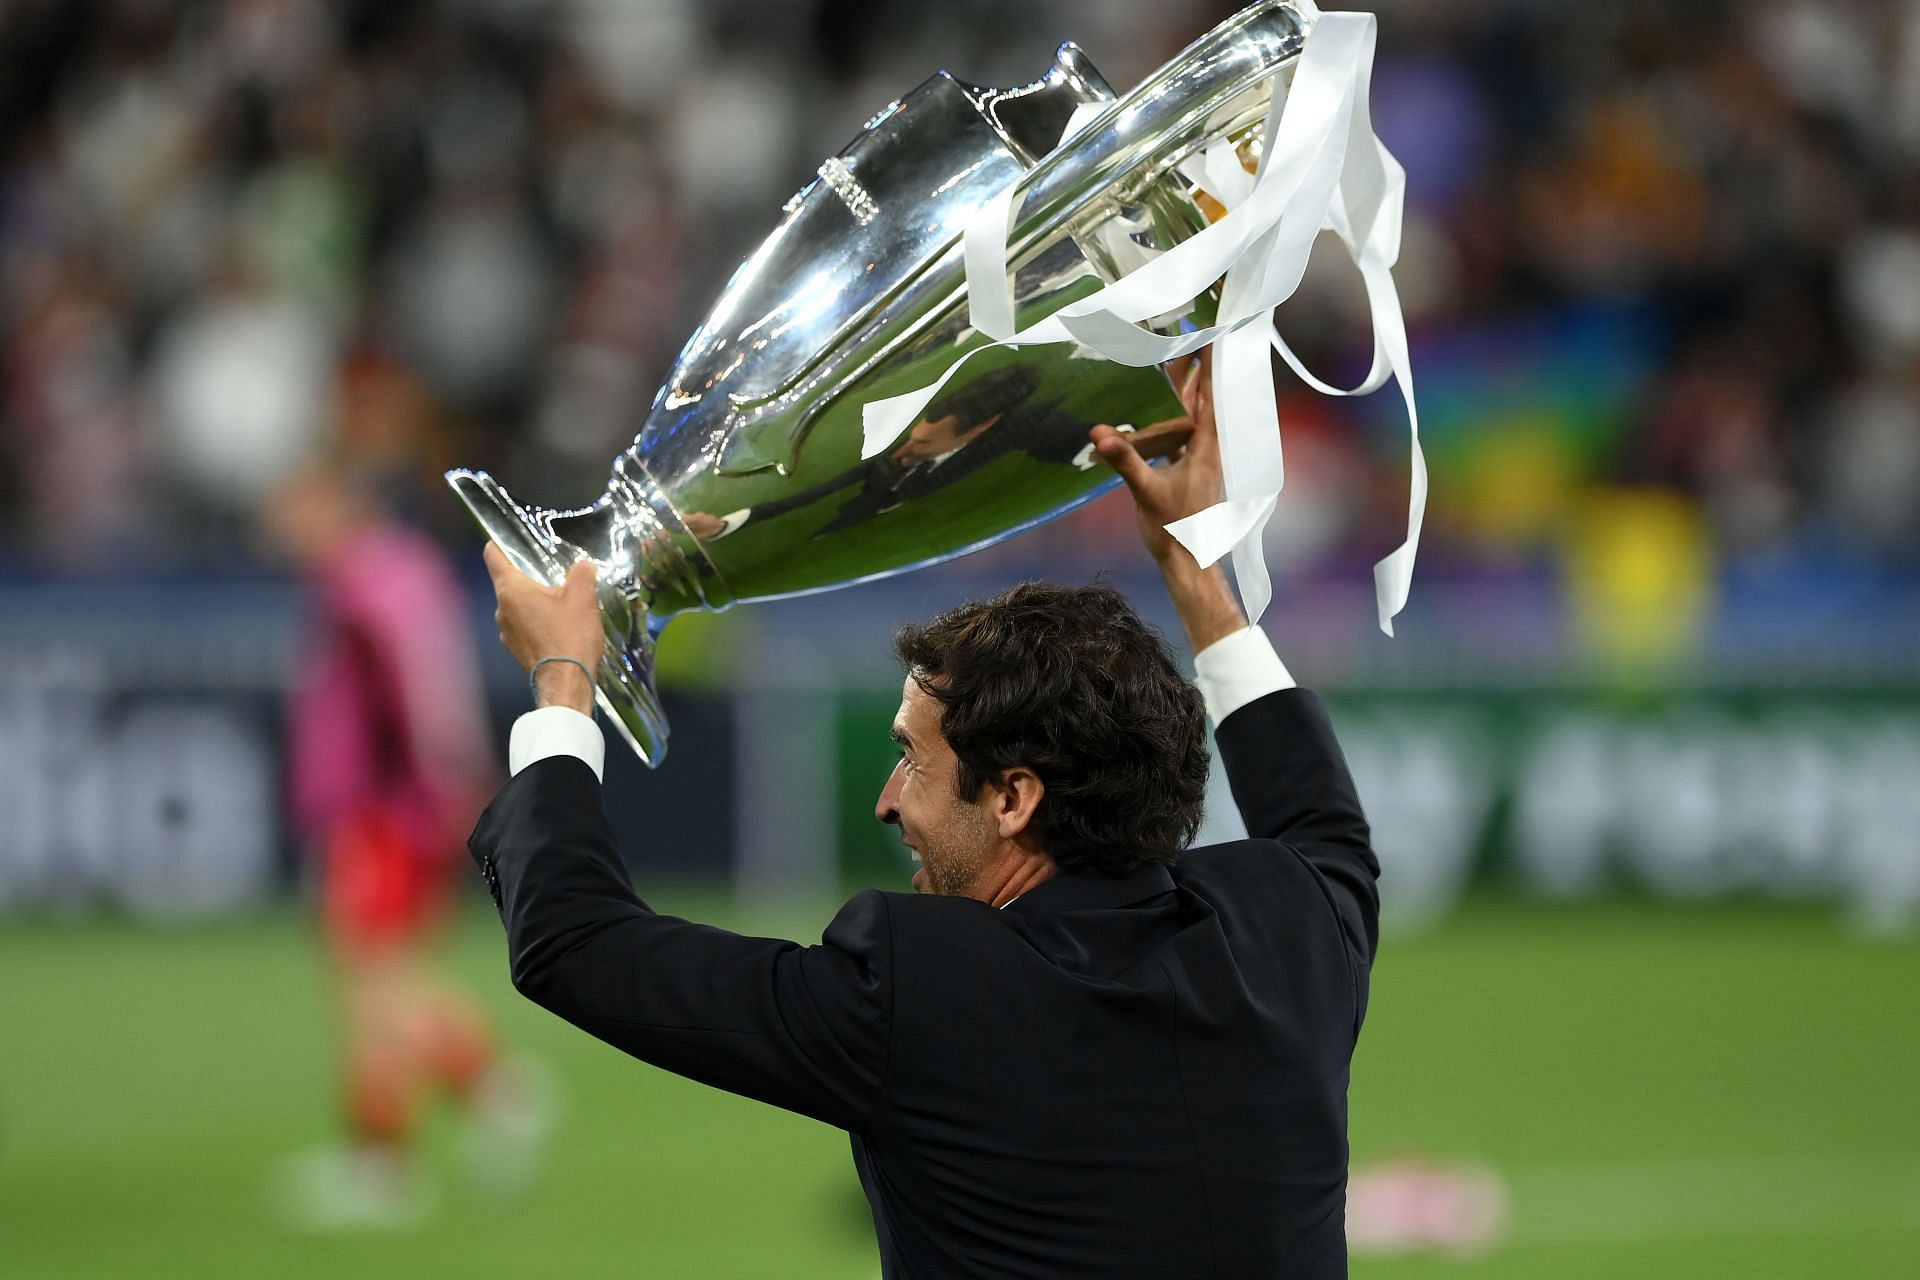 Raul brought the trophy for Los Blancos to lift.